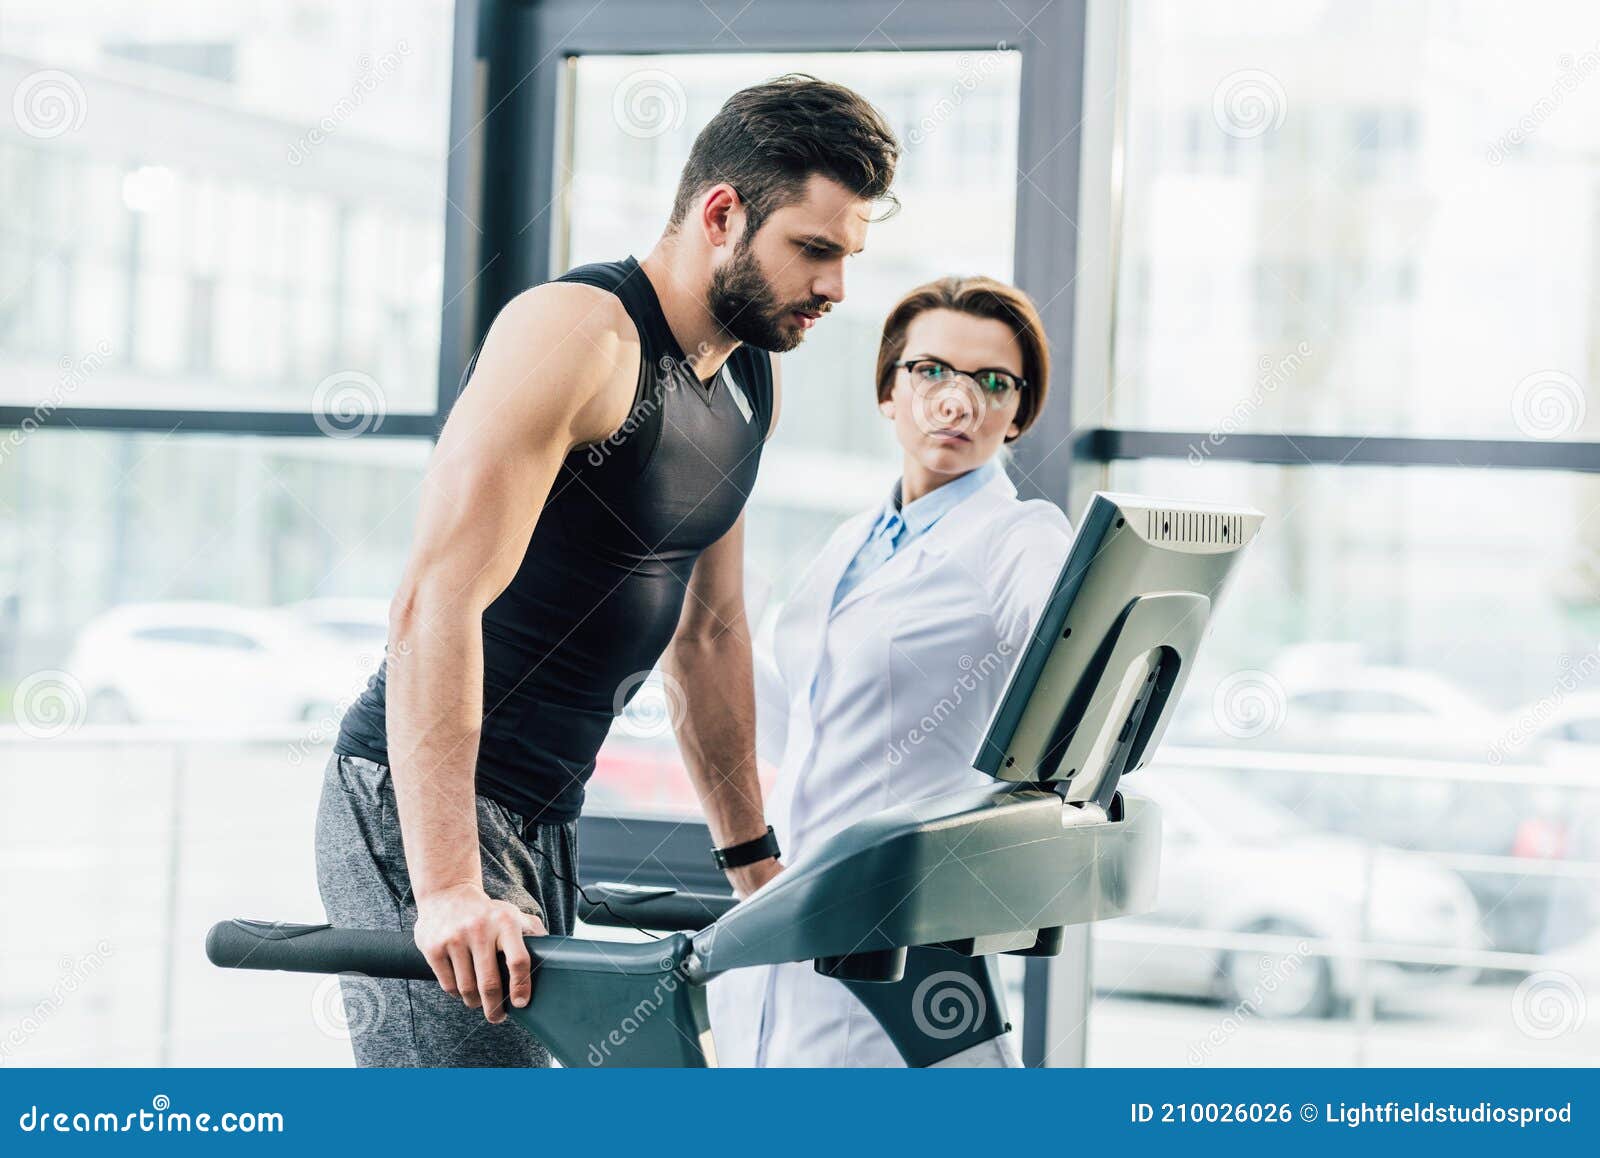 Sportsman Training Treadmill Near during Endurance Test Gym. Stock Photo - Image of running, workout: 210026026